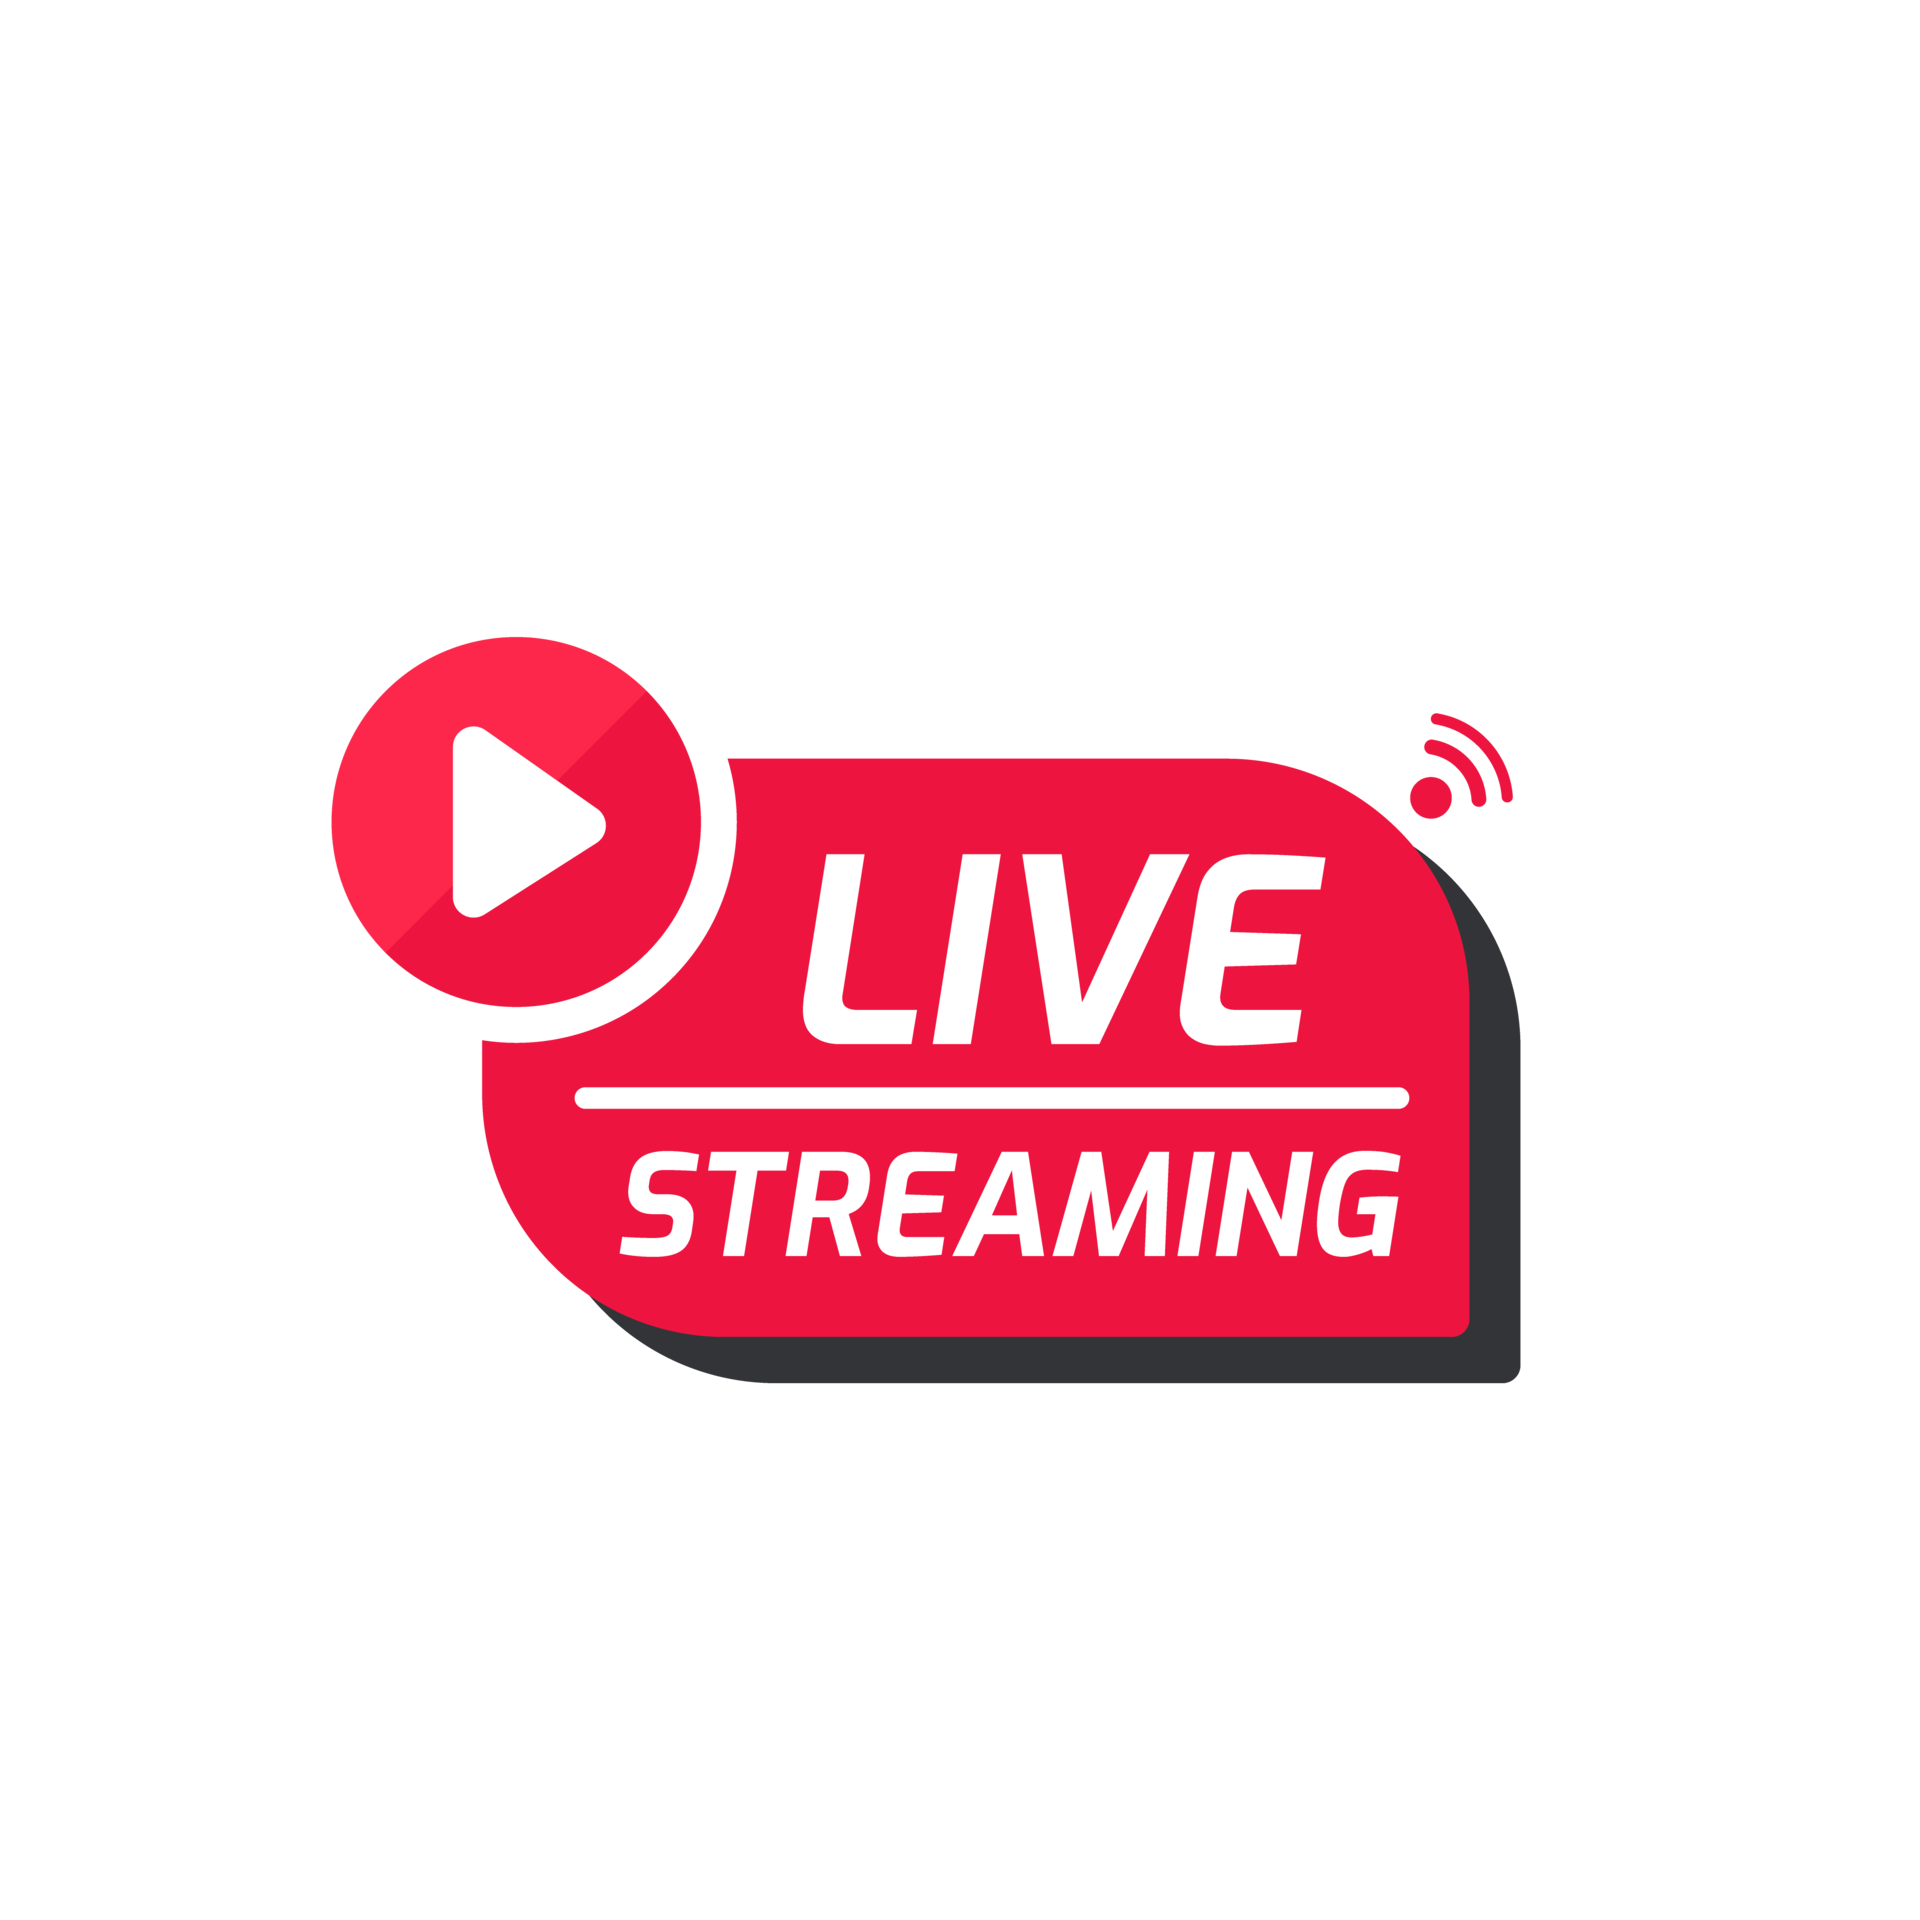 Live streaming symbol set Online broadcast icon The concept of live streaming for selling on social media